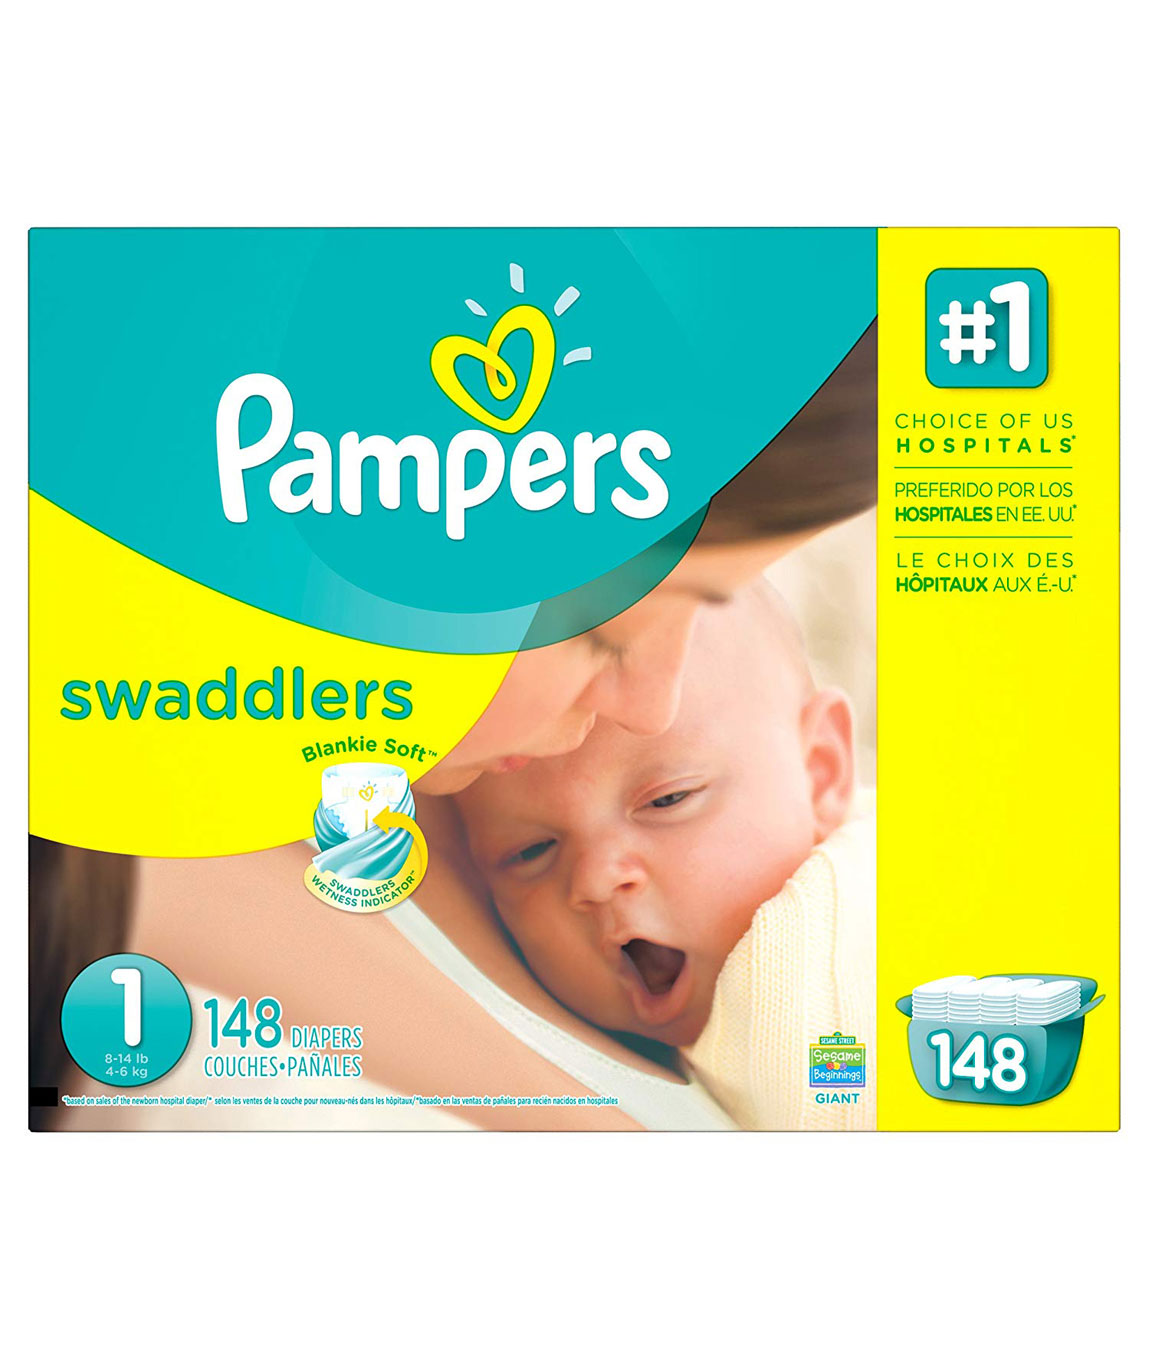 Pampers Newborn Swaddlers Diapers (Size 1) - 148 Count